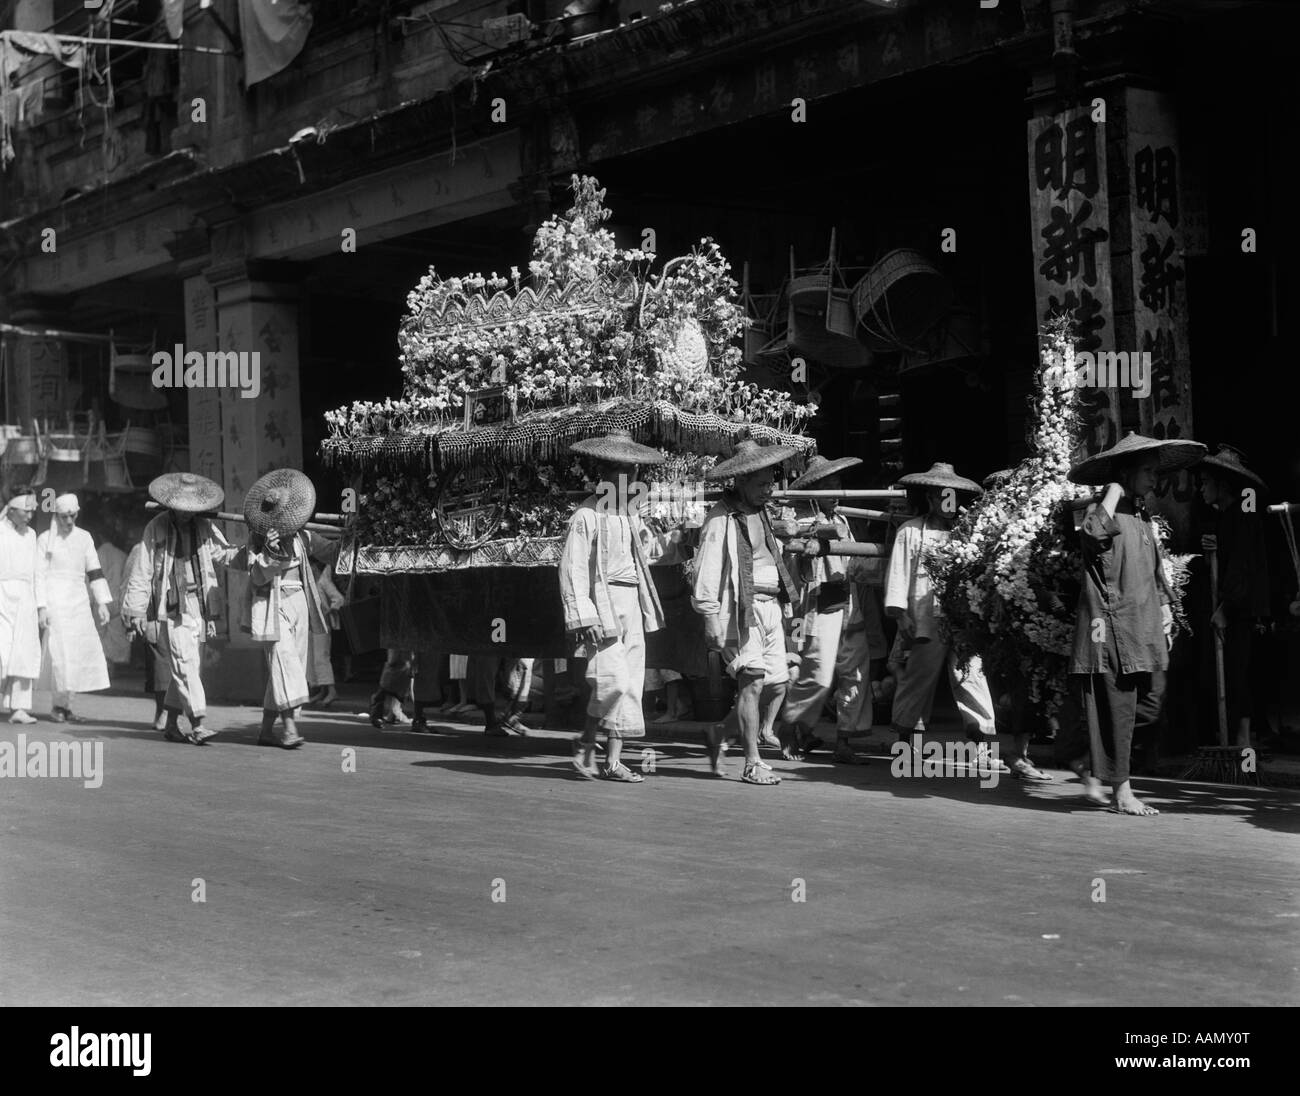 1930s CHINESE FUNERAL PARADES PALANQUIN BIER COFFIN FLOAT PARADE CEREMONY RITE HONG KONG CHINA Stock Photo